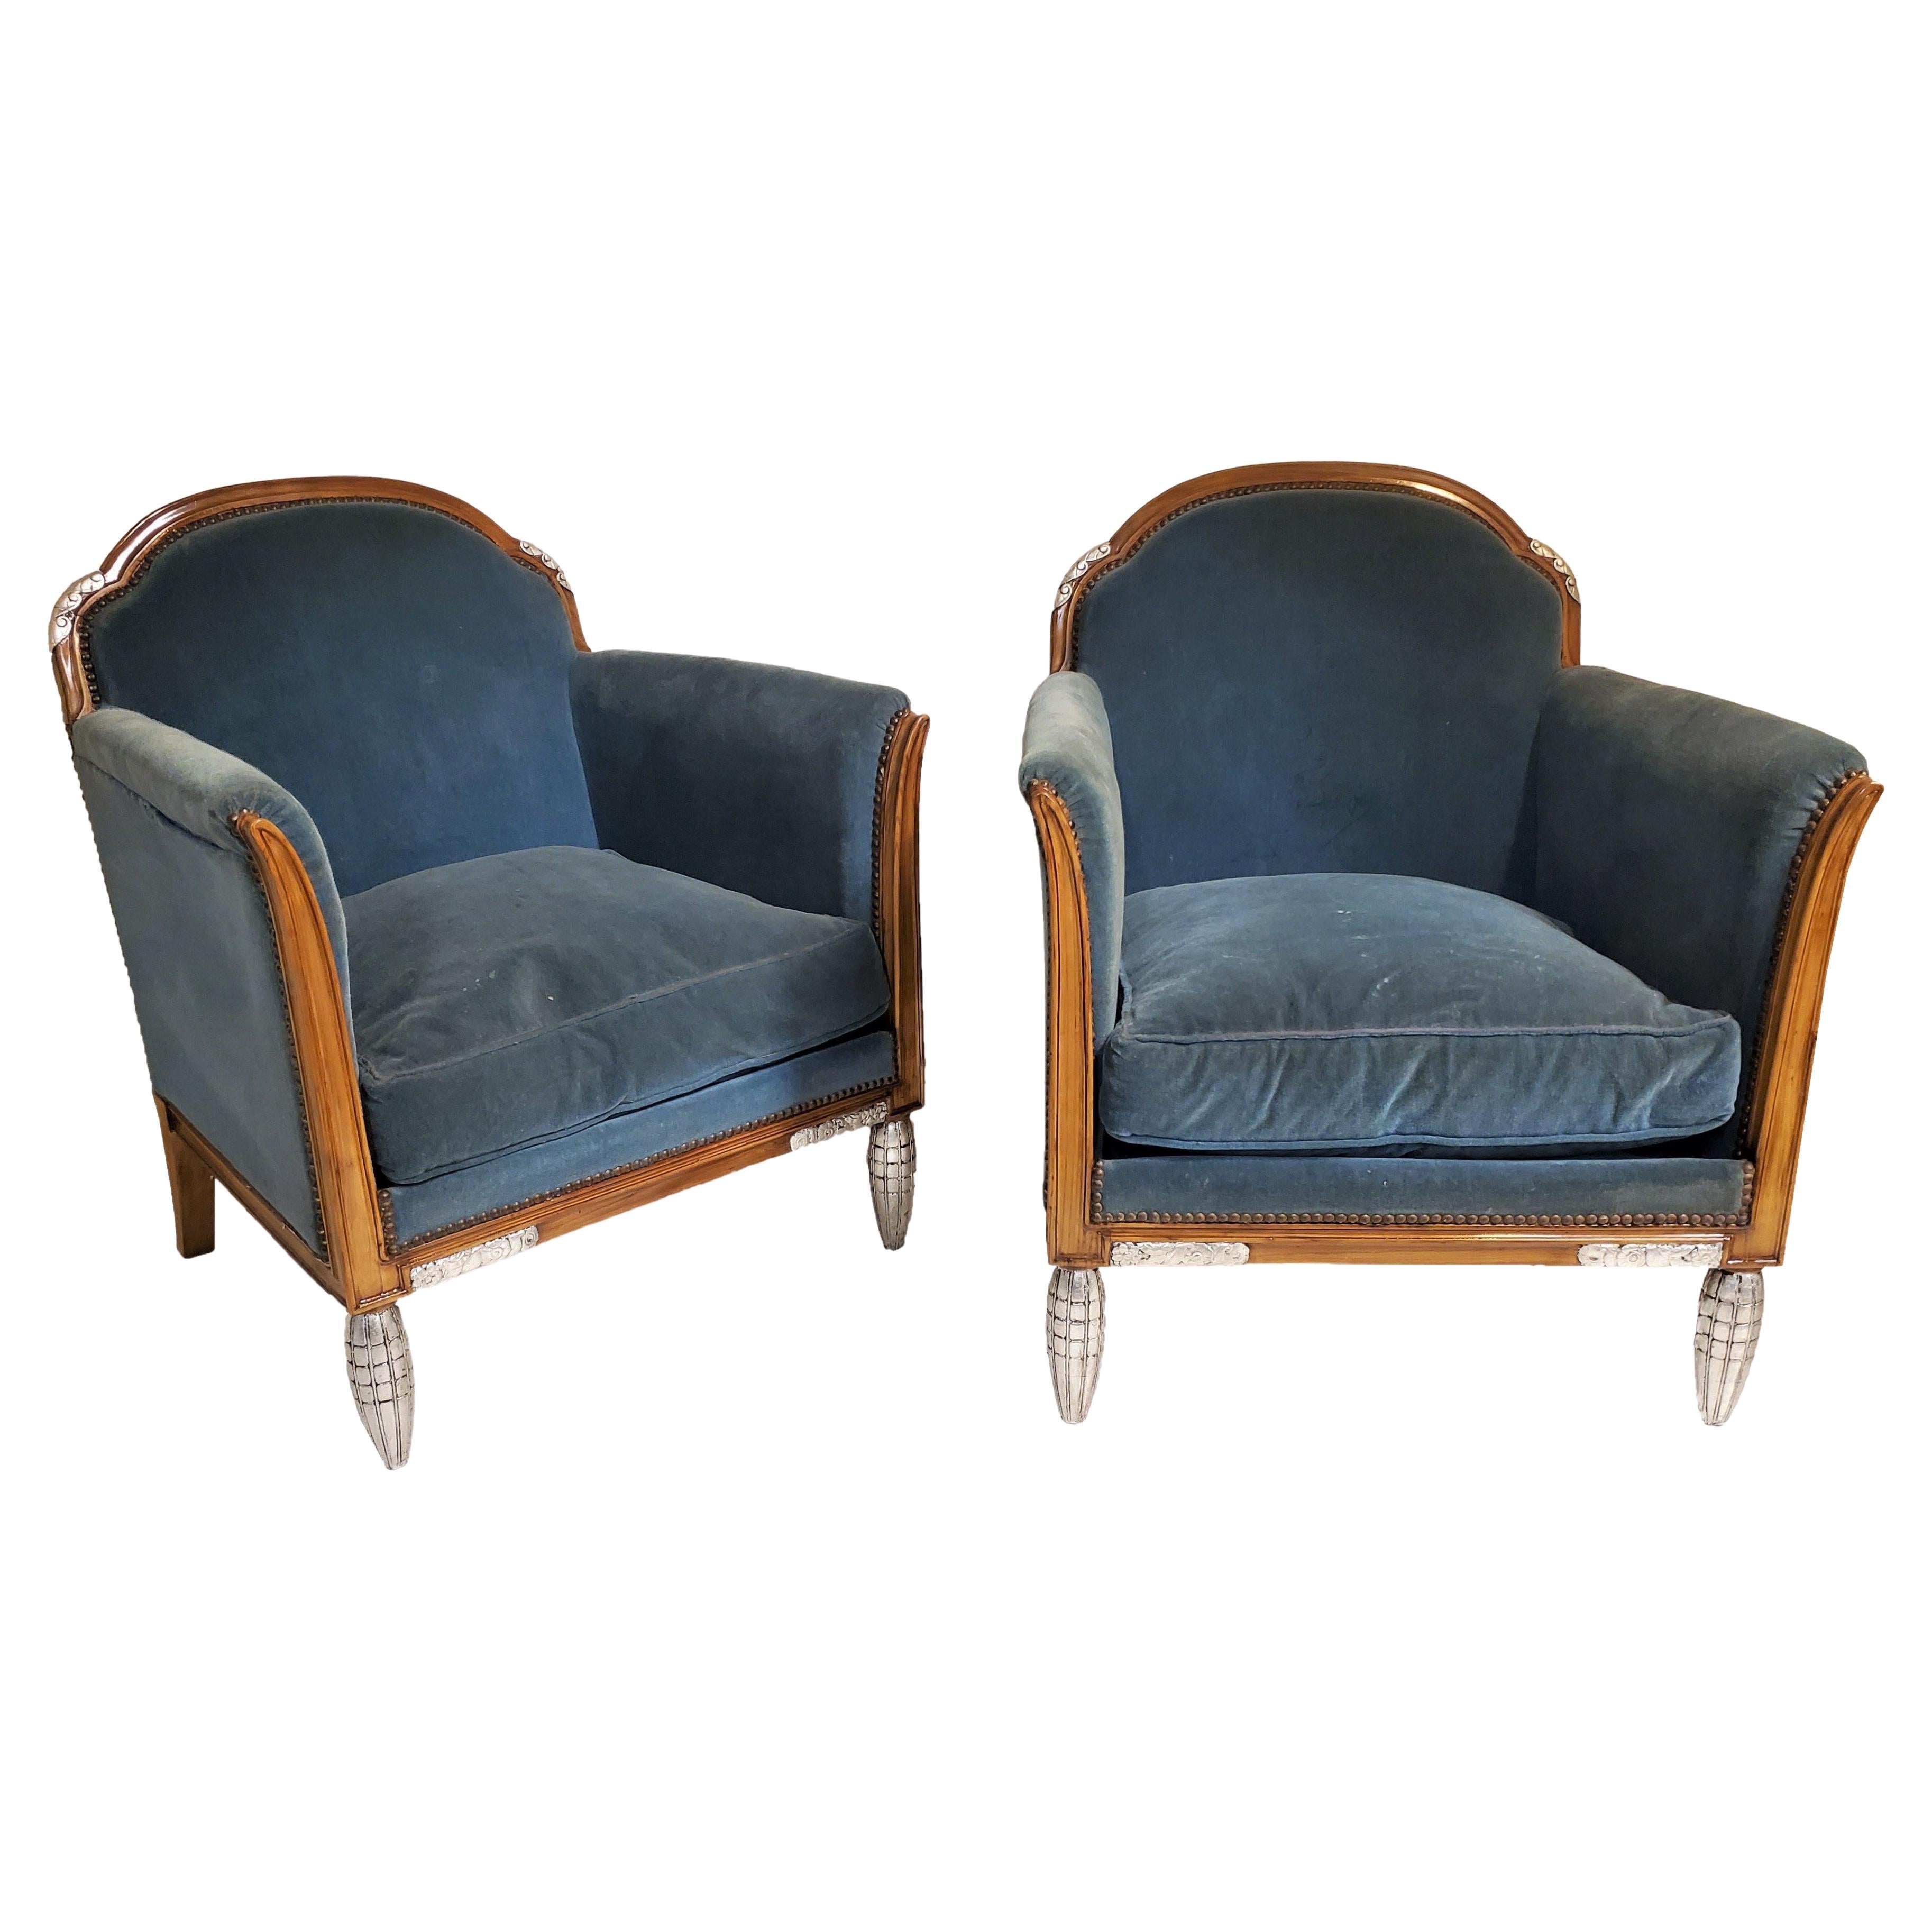 Pair of Original French Art Deco Walnut and Metal Leaf Arm Chairs Paul Follot For Sale